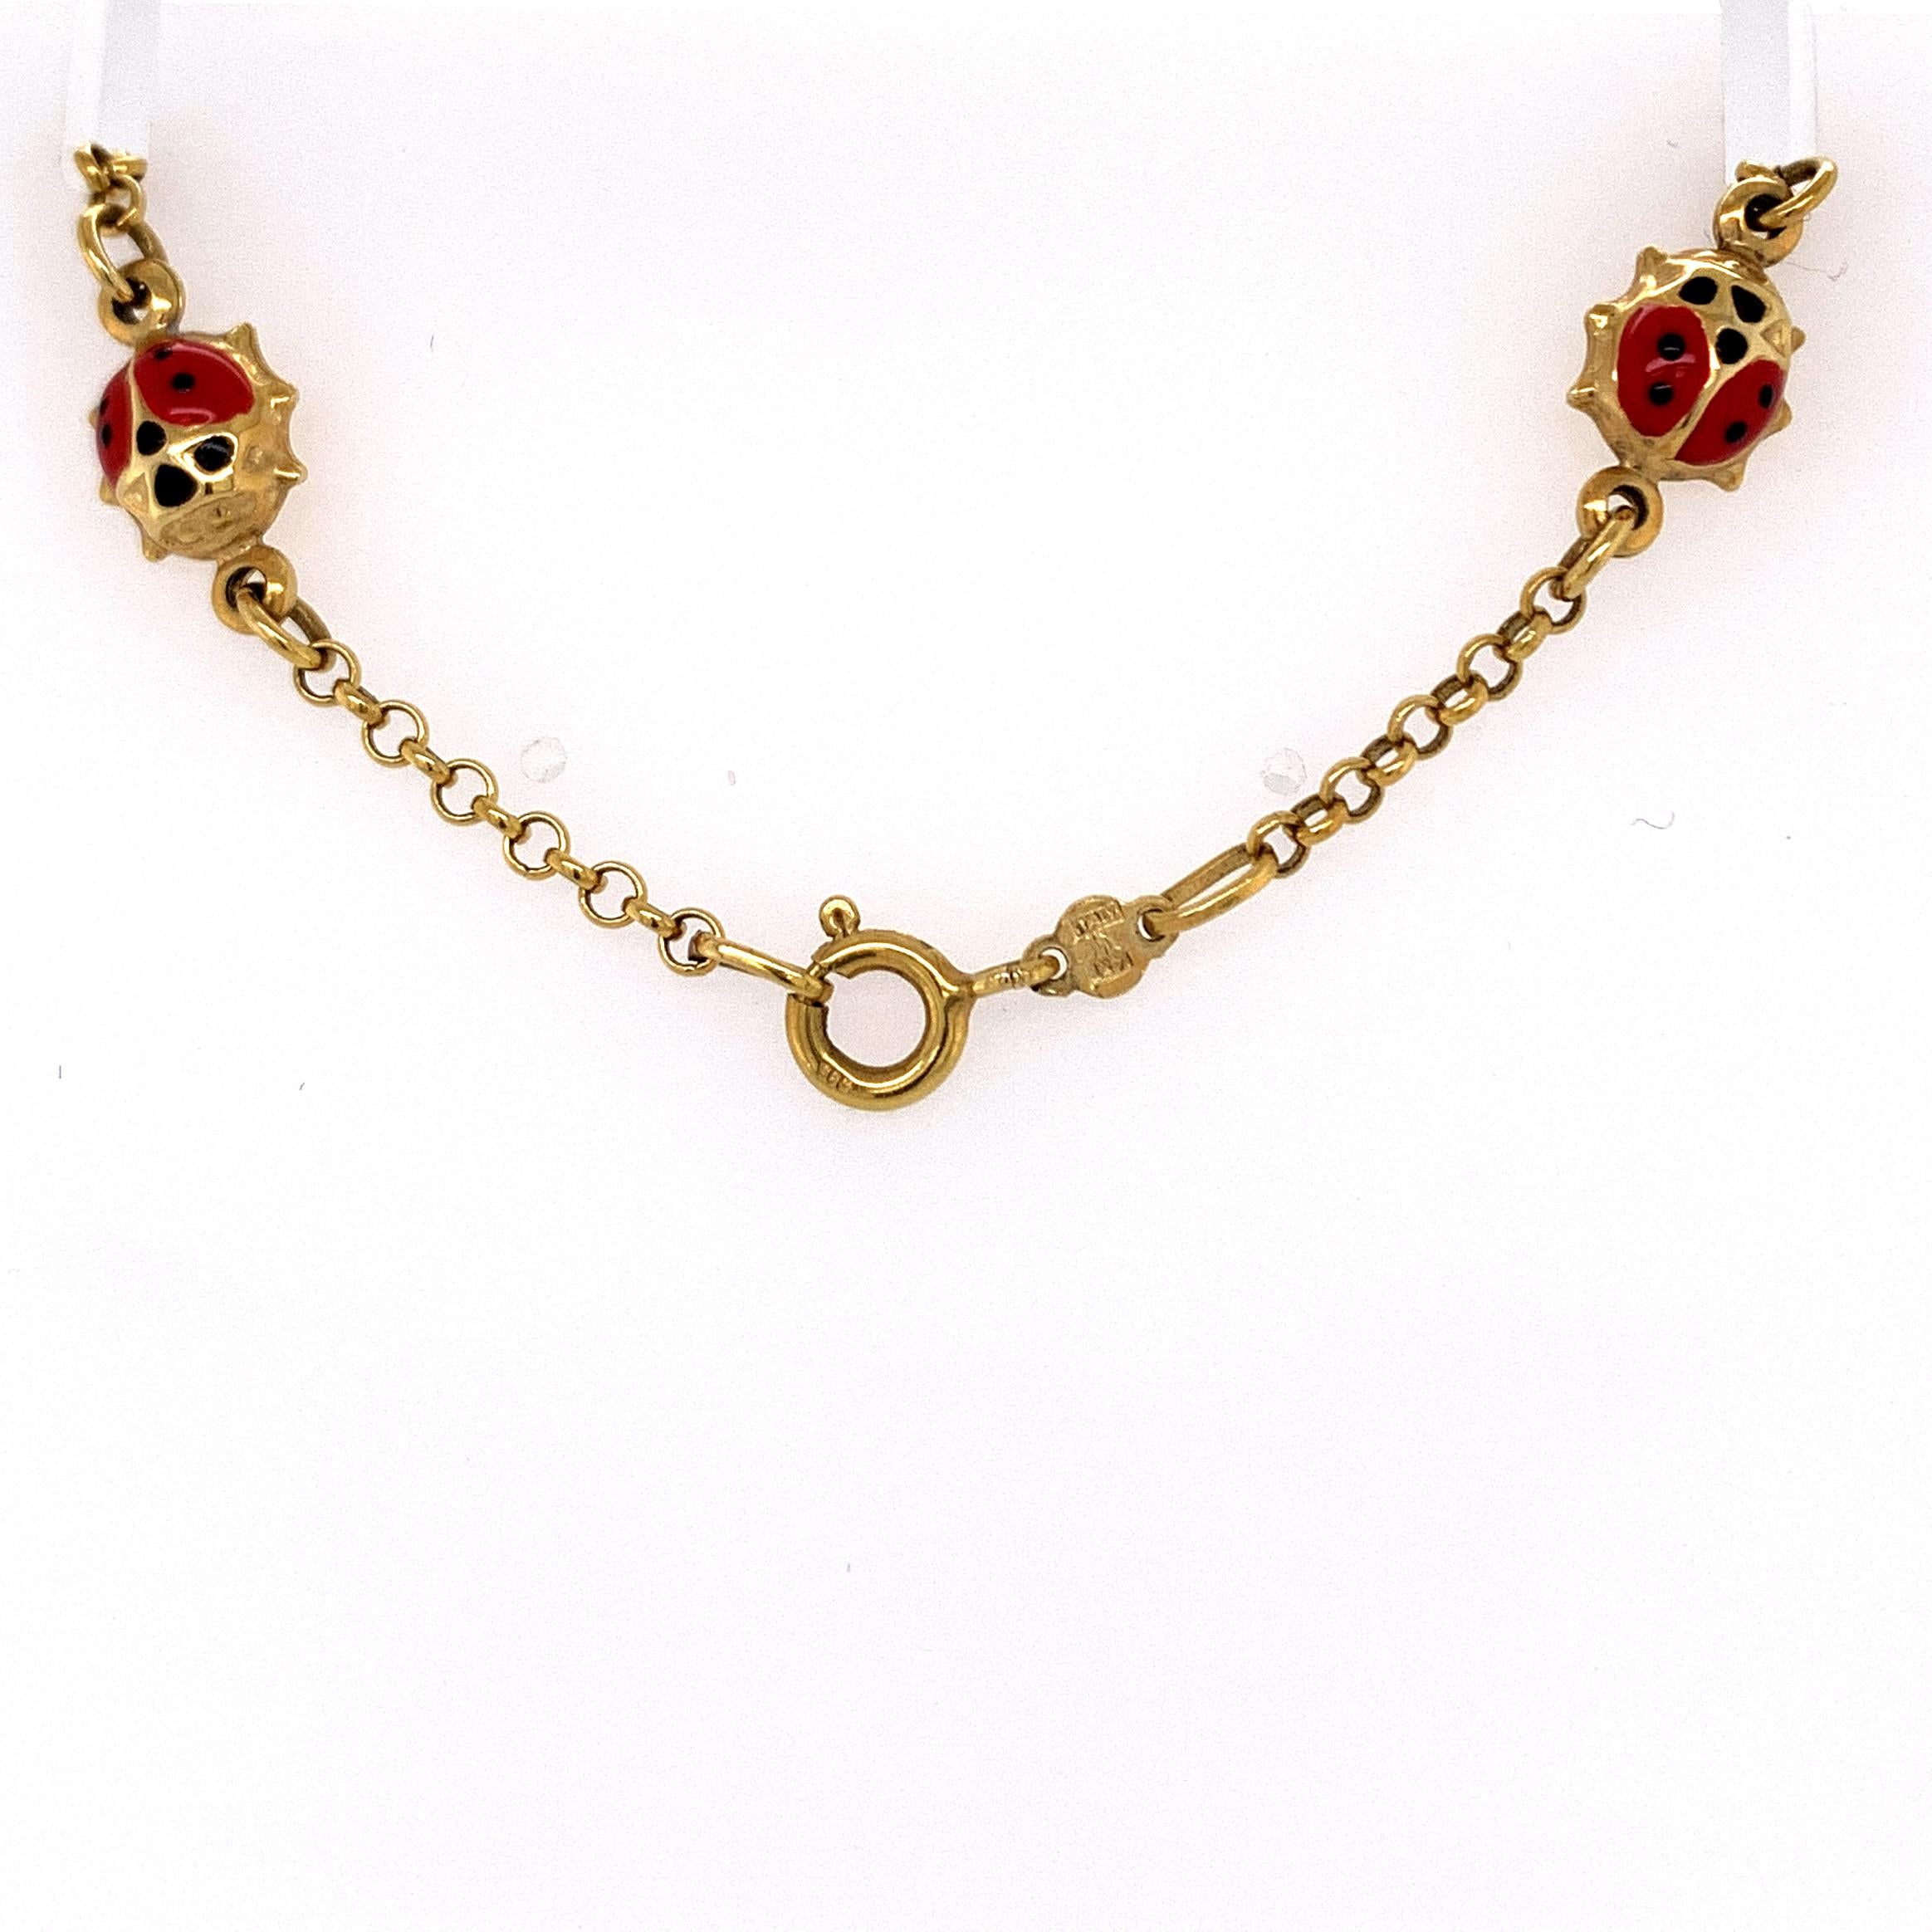 Charming necklace:  Eight figural 